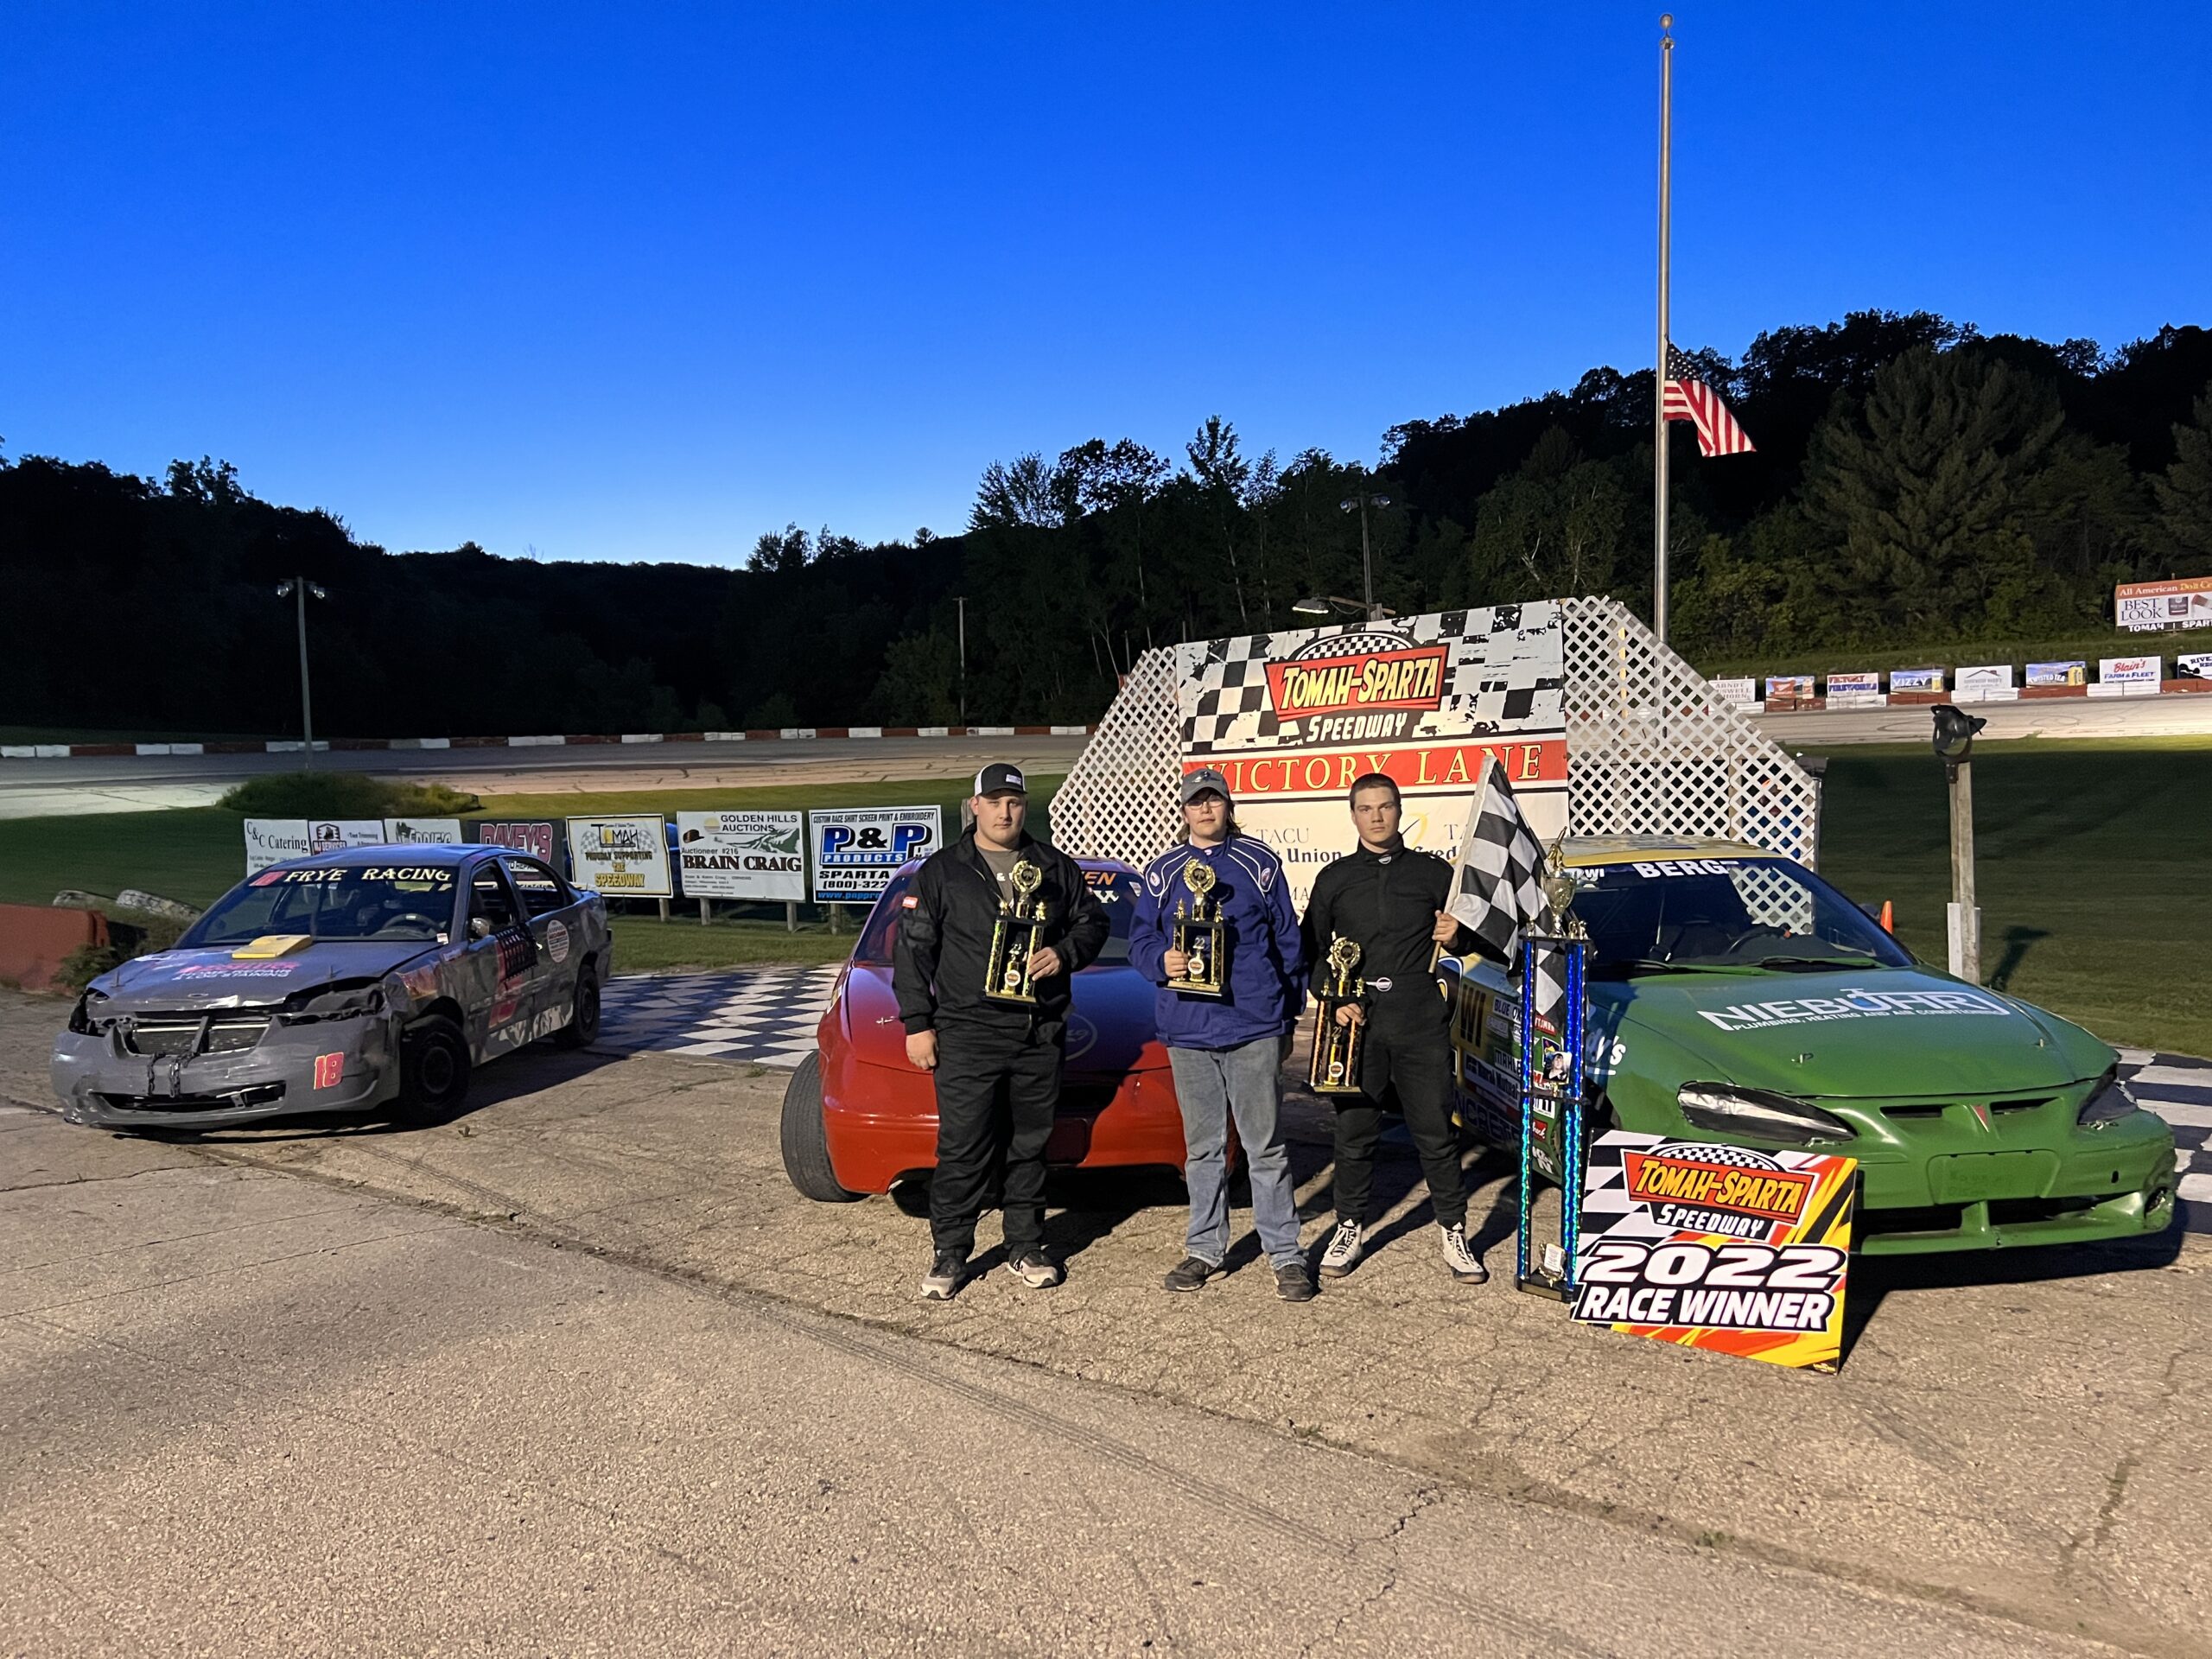 Student racers stand in victory lane at the Tomah/Sparta speedway